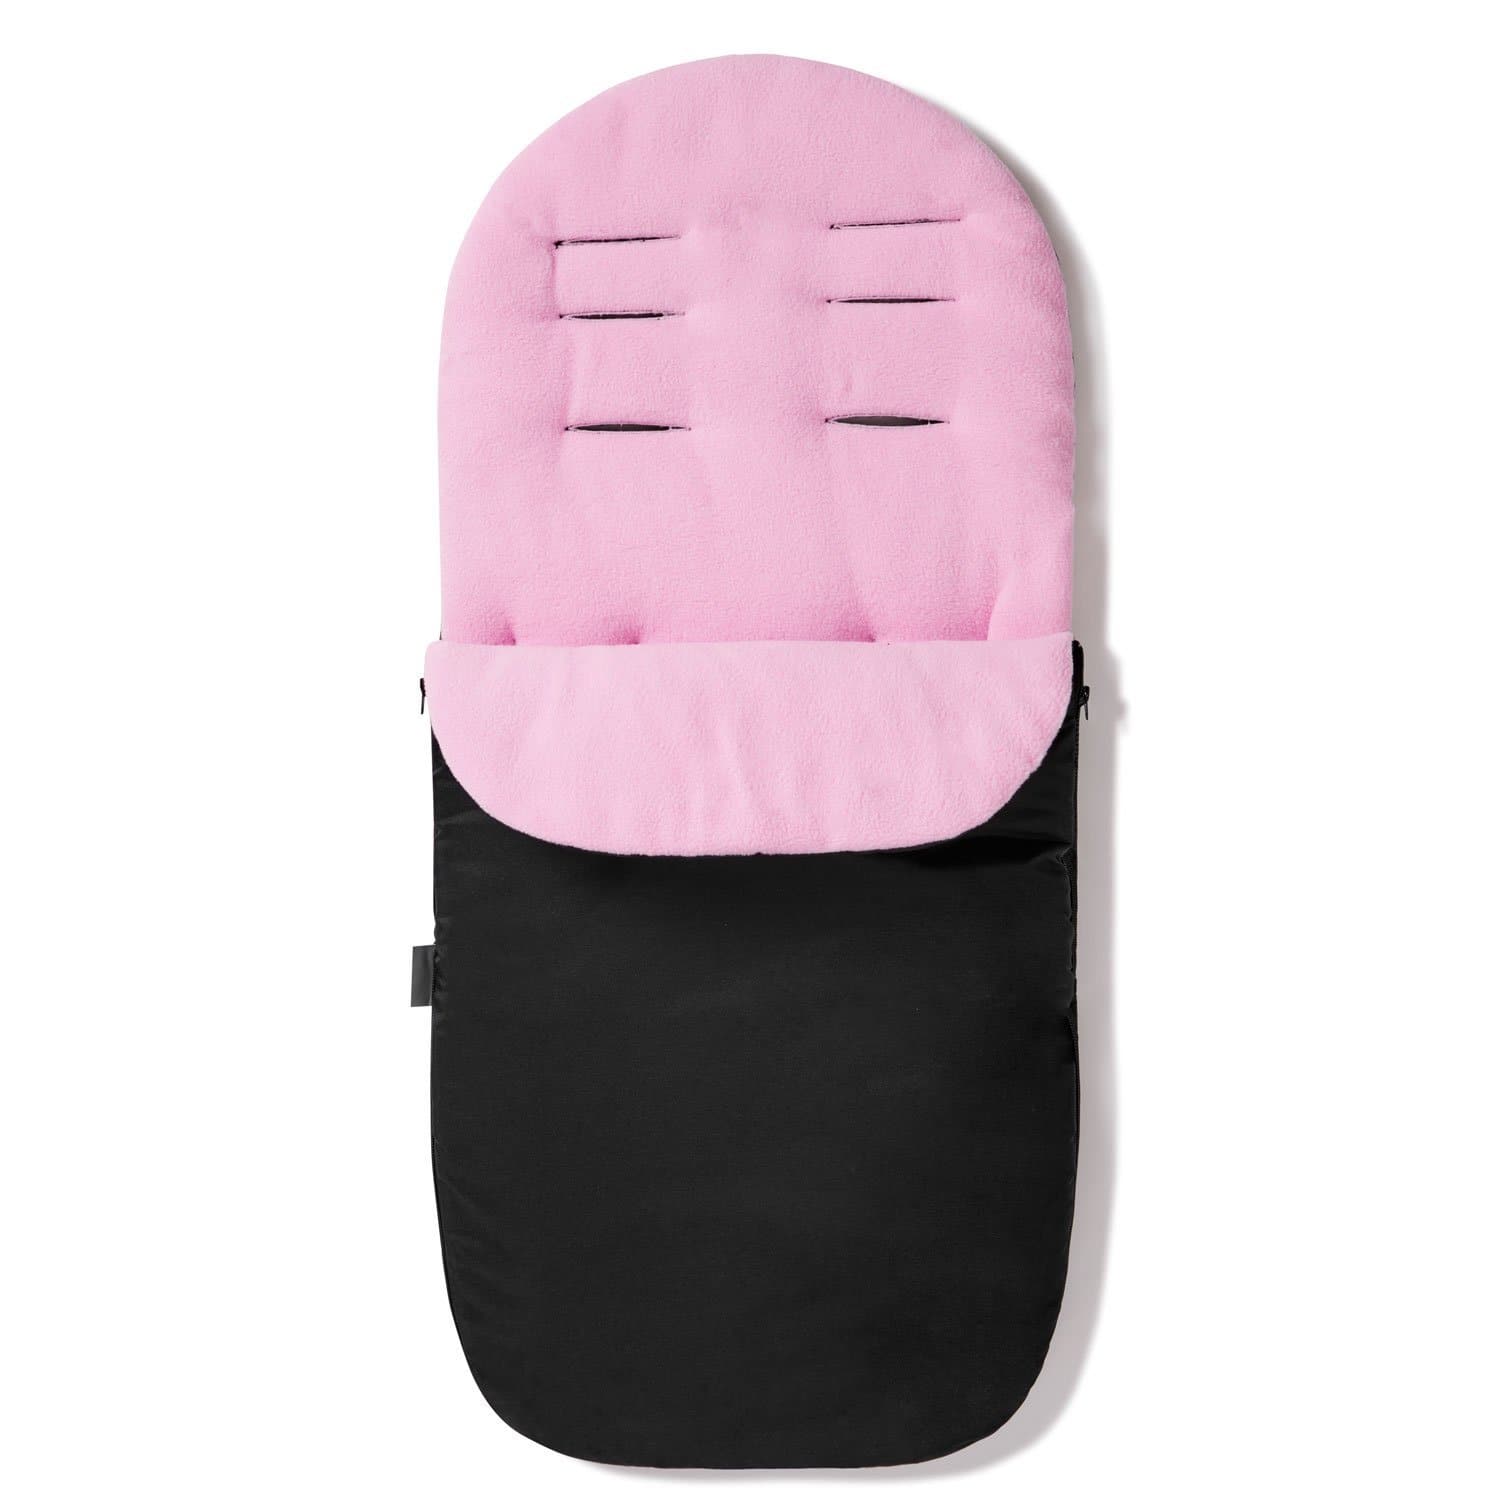 Footmuff / Cosy Toes Compatible with Egg - Light Pink / Fits All Models | For Your Little One